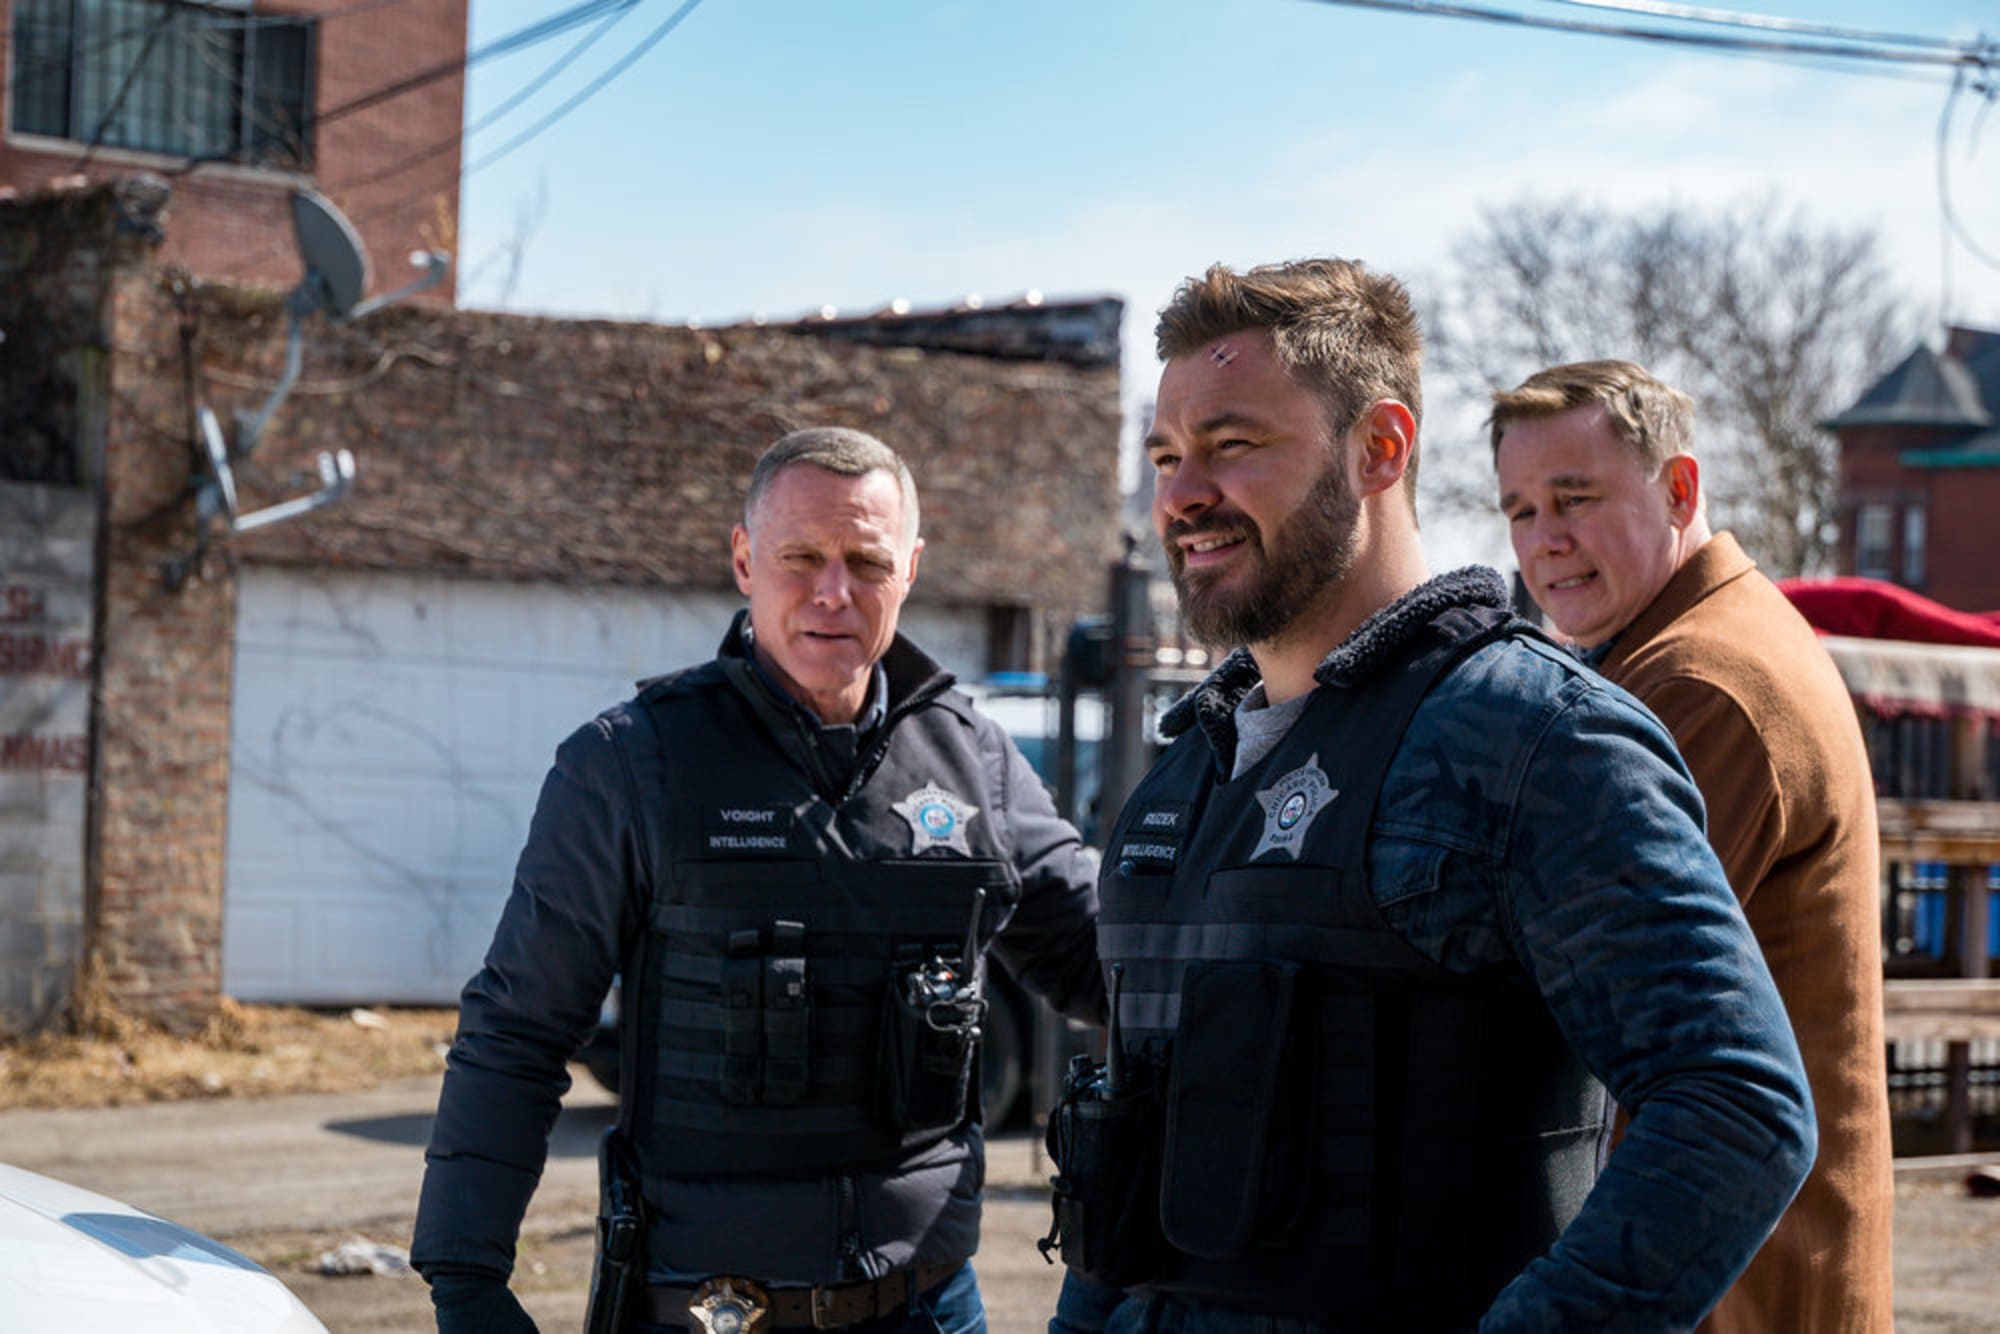 chicago pd latest episode